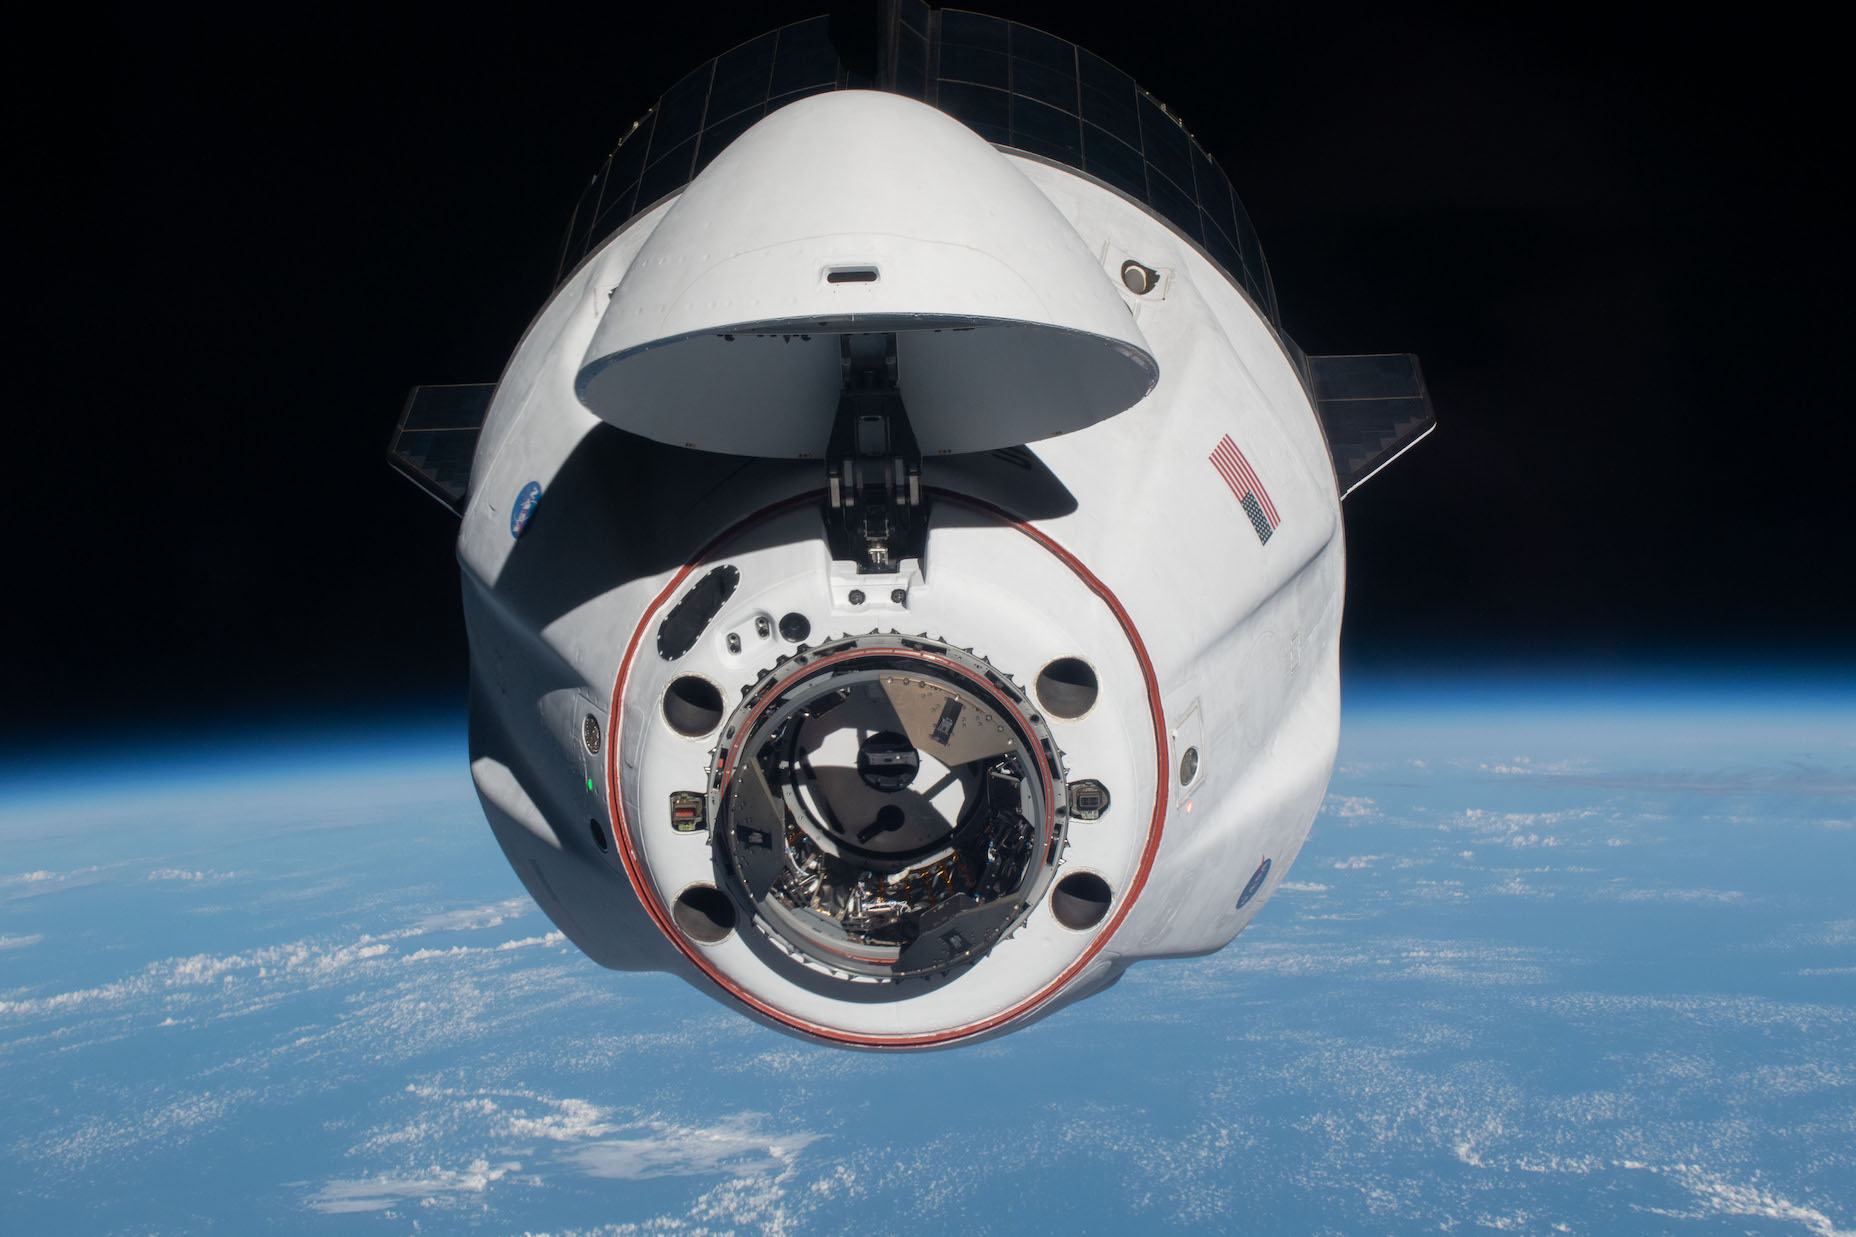 SpaceX's Dragon spacecraft photographed from the ISS.